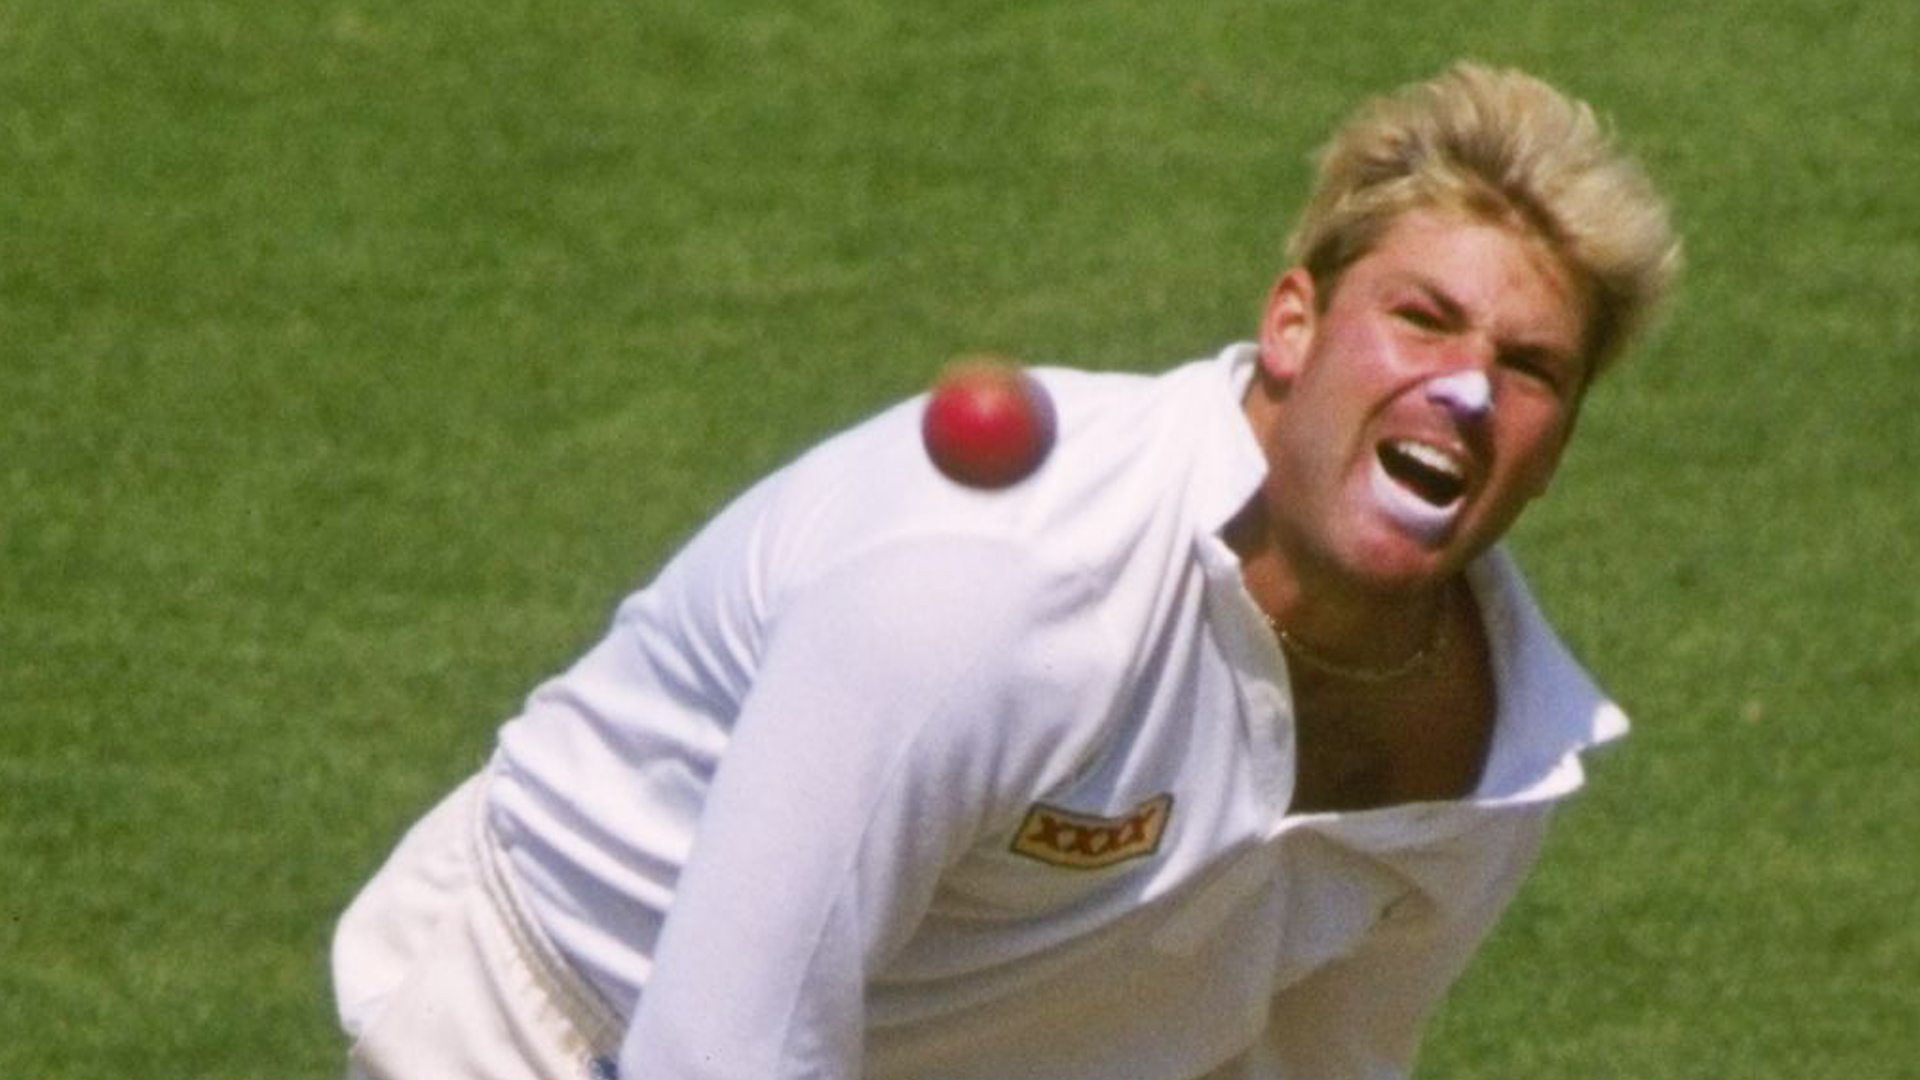 Shane Warne bowls Mike Gatting with 'ball of the century' in 1993 Ashes -  BBC Sport